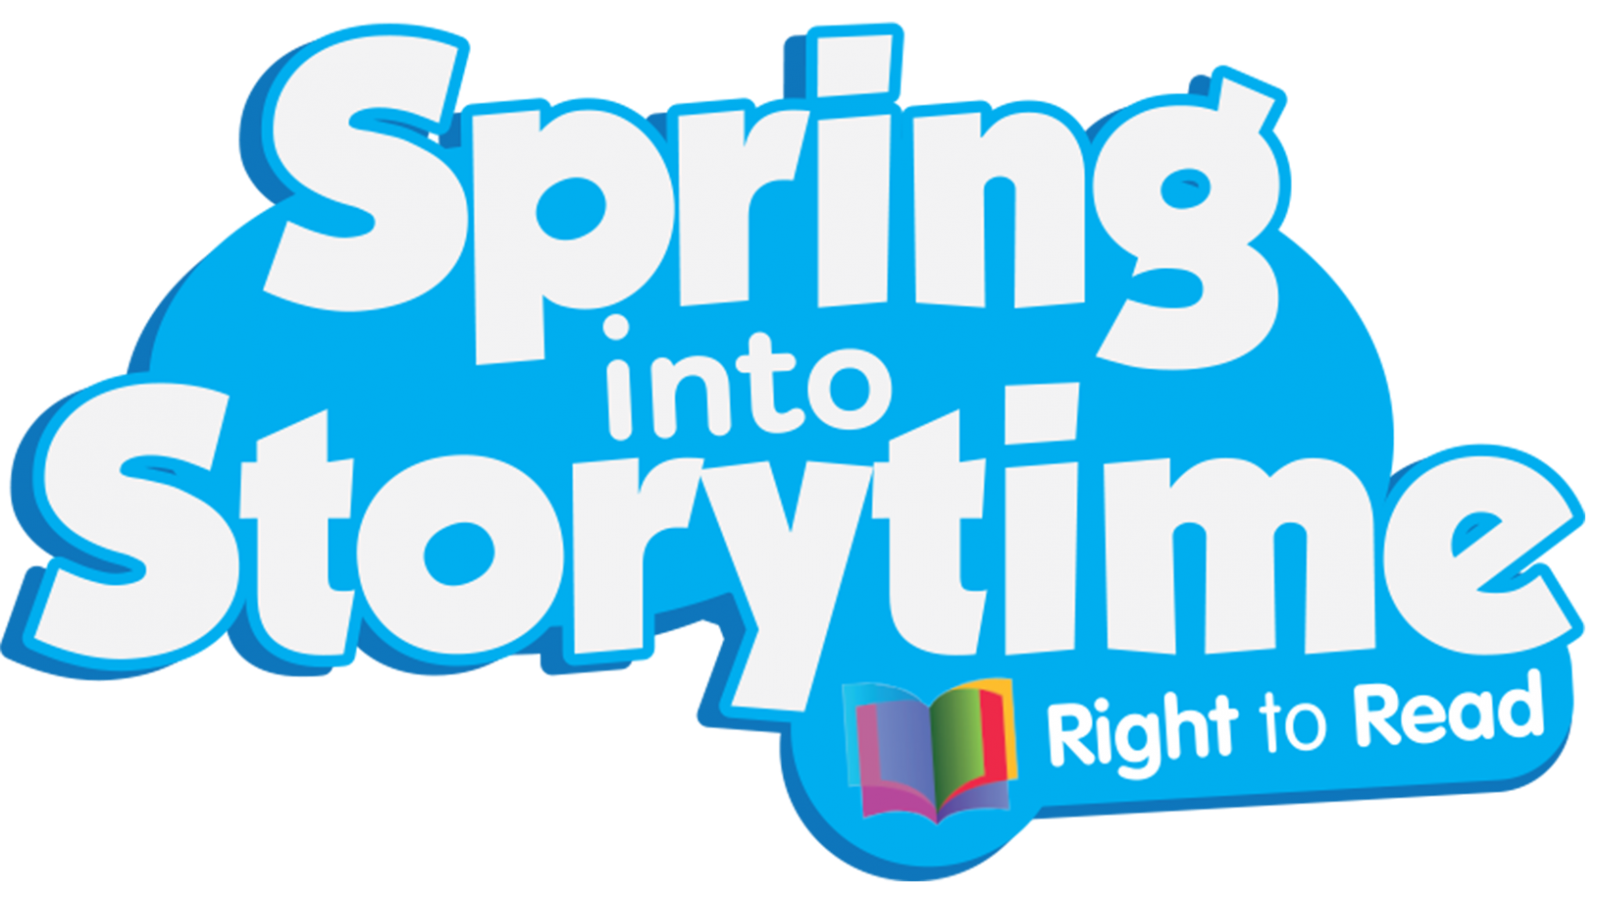 Spring into Storytime